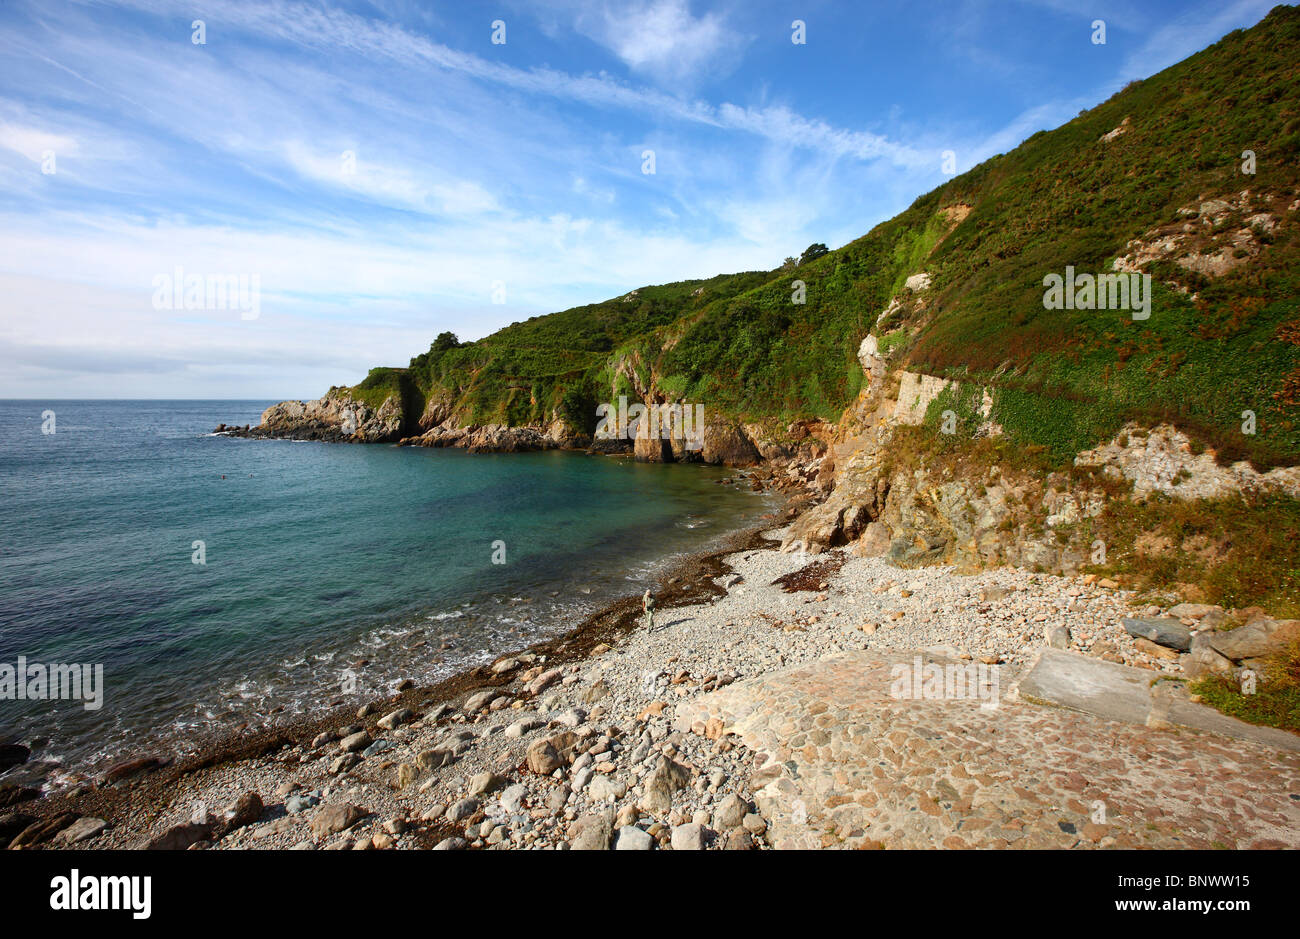 Beach at Petit Bot Bay, Guernsey, Channel Islands, UK, Europe Stock Photo